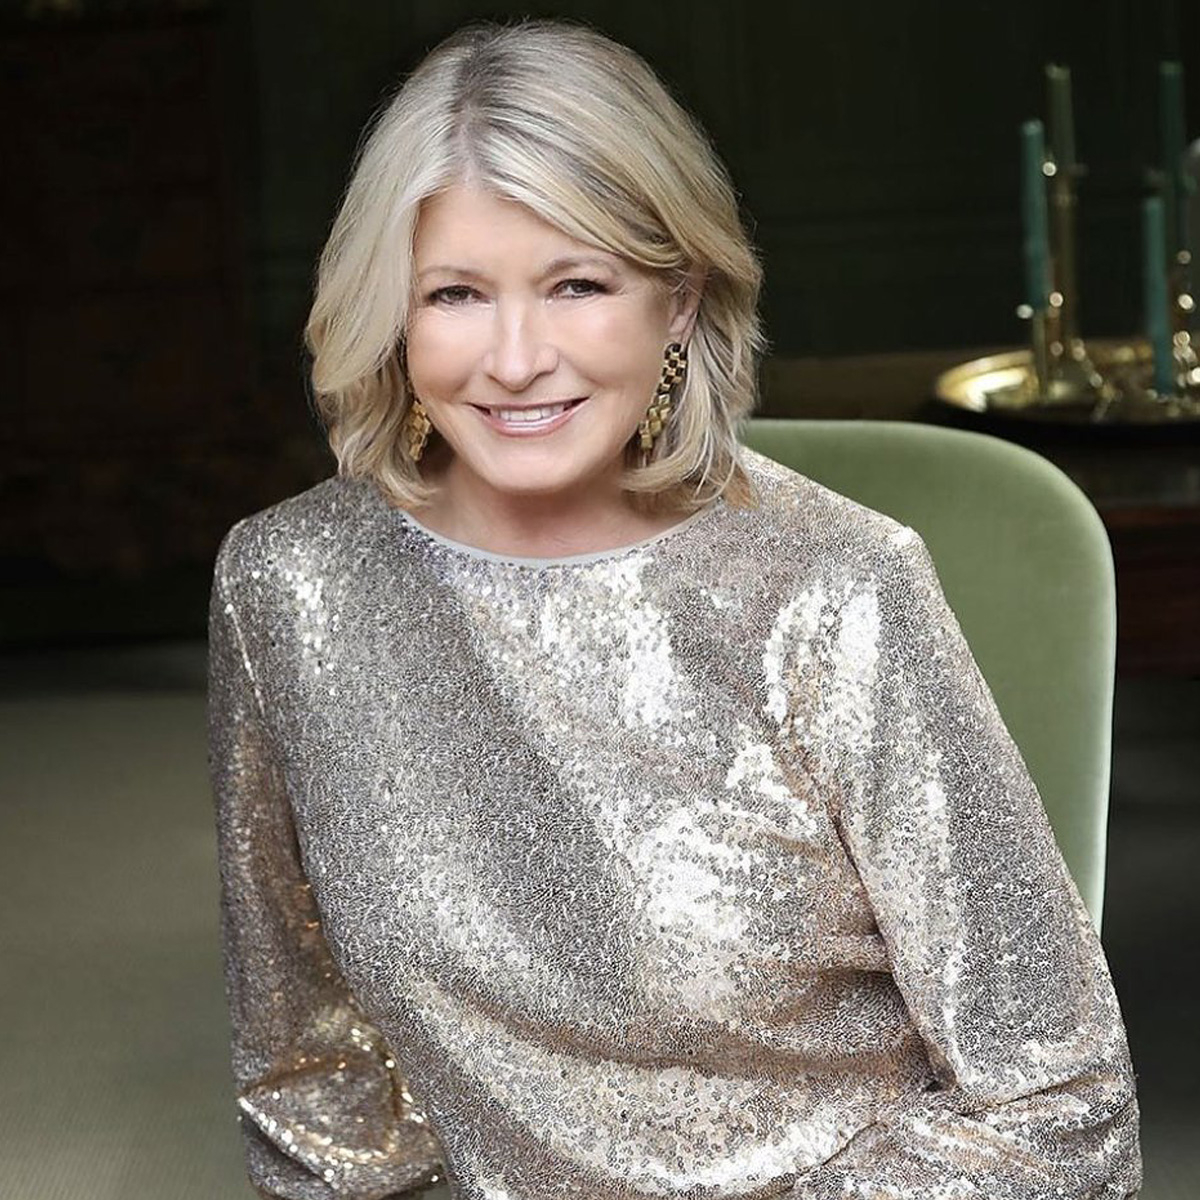 Martha Stewart's 'Incredibly Soft' Bath Towels Are on Sale at